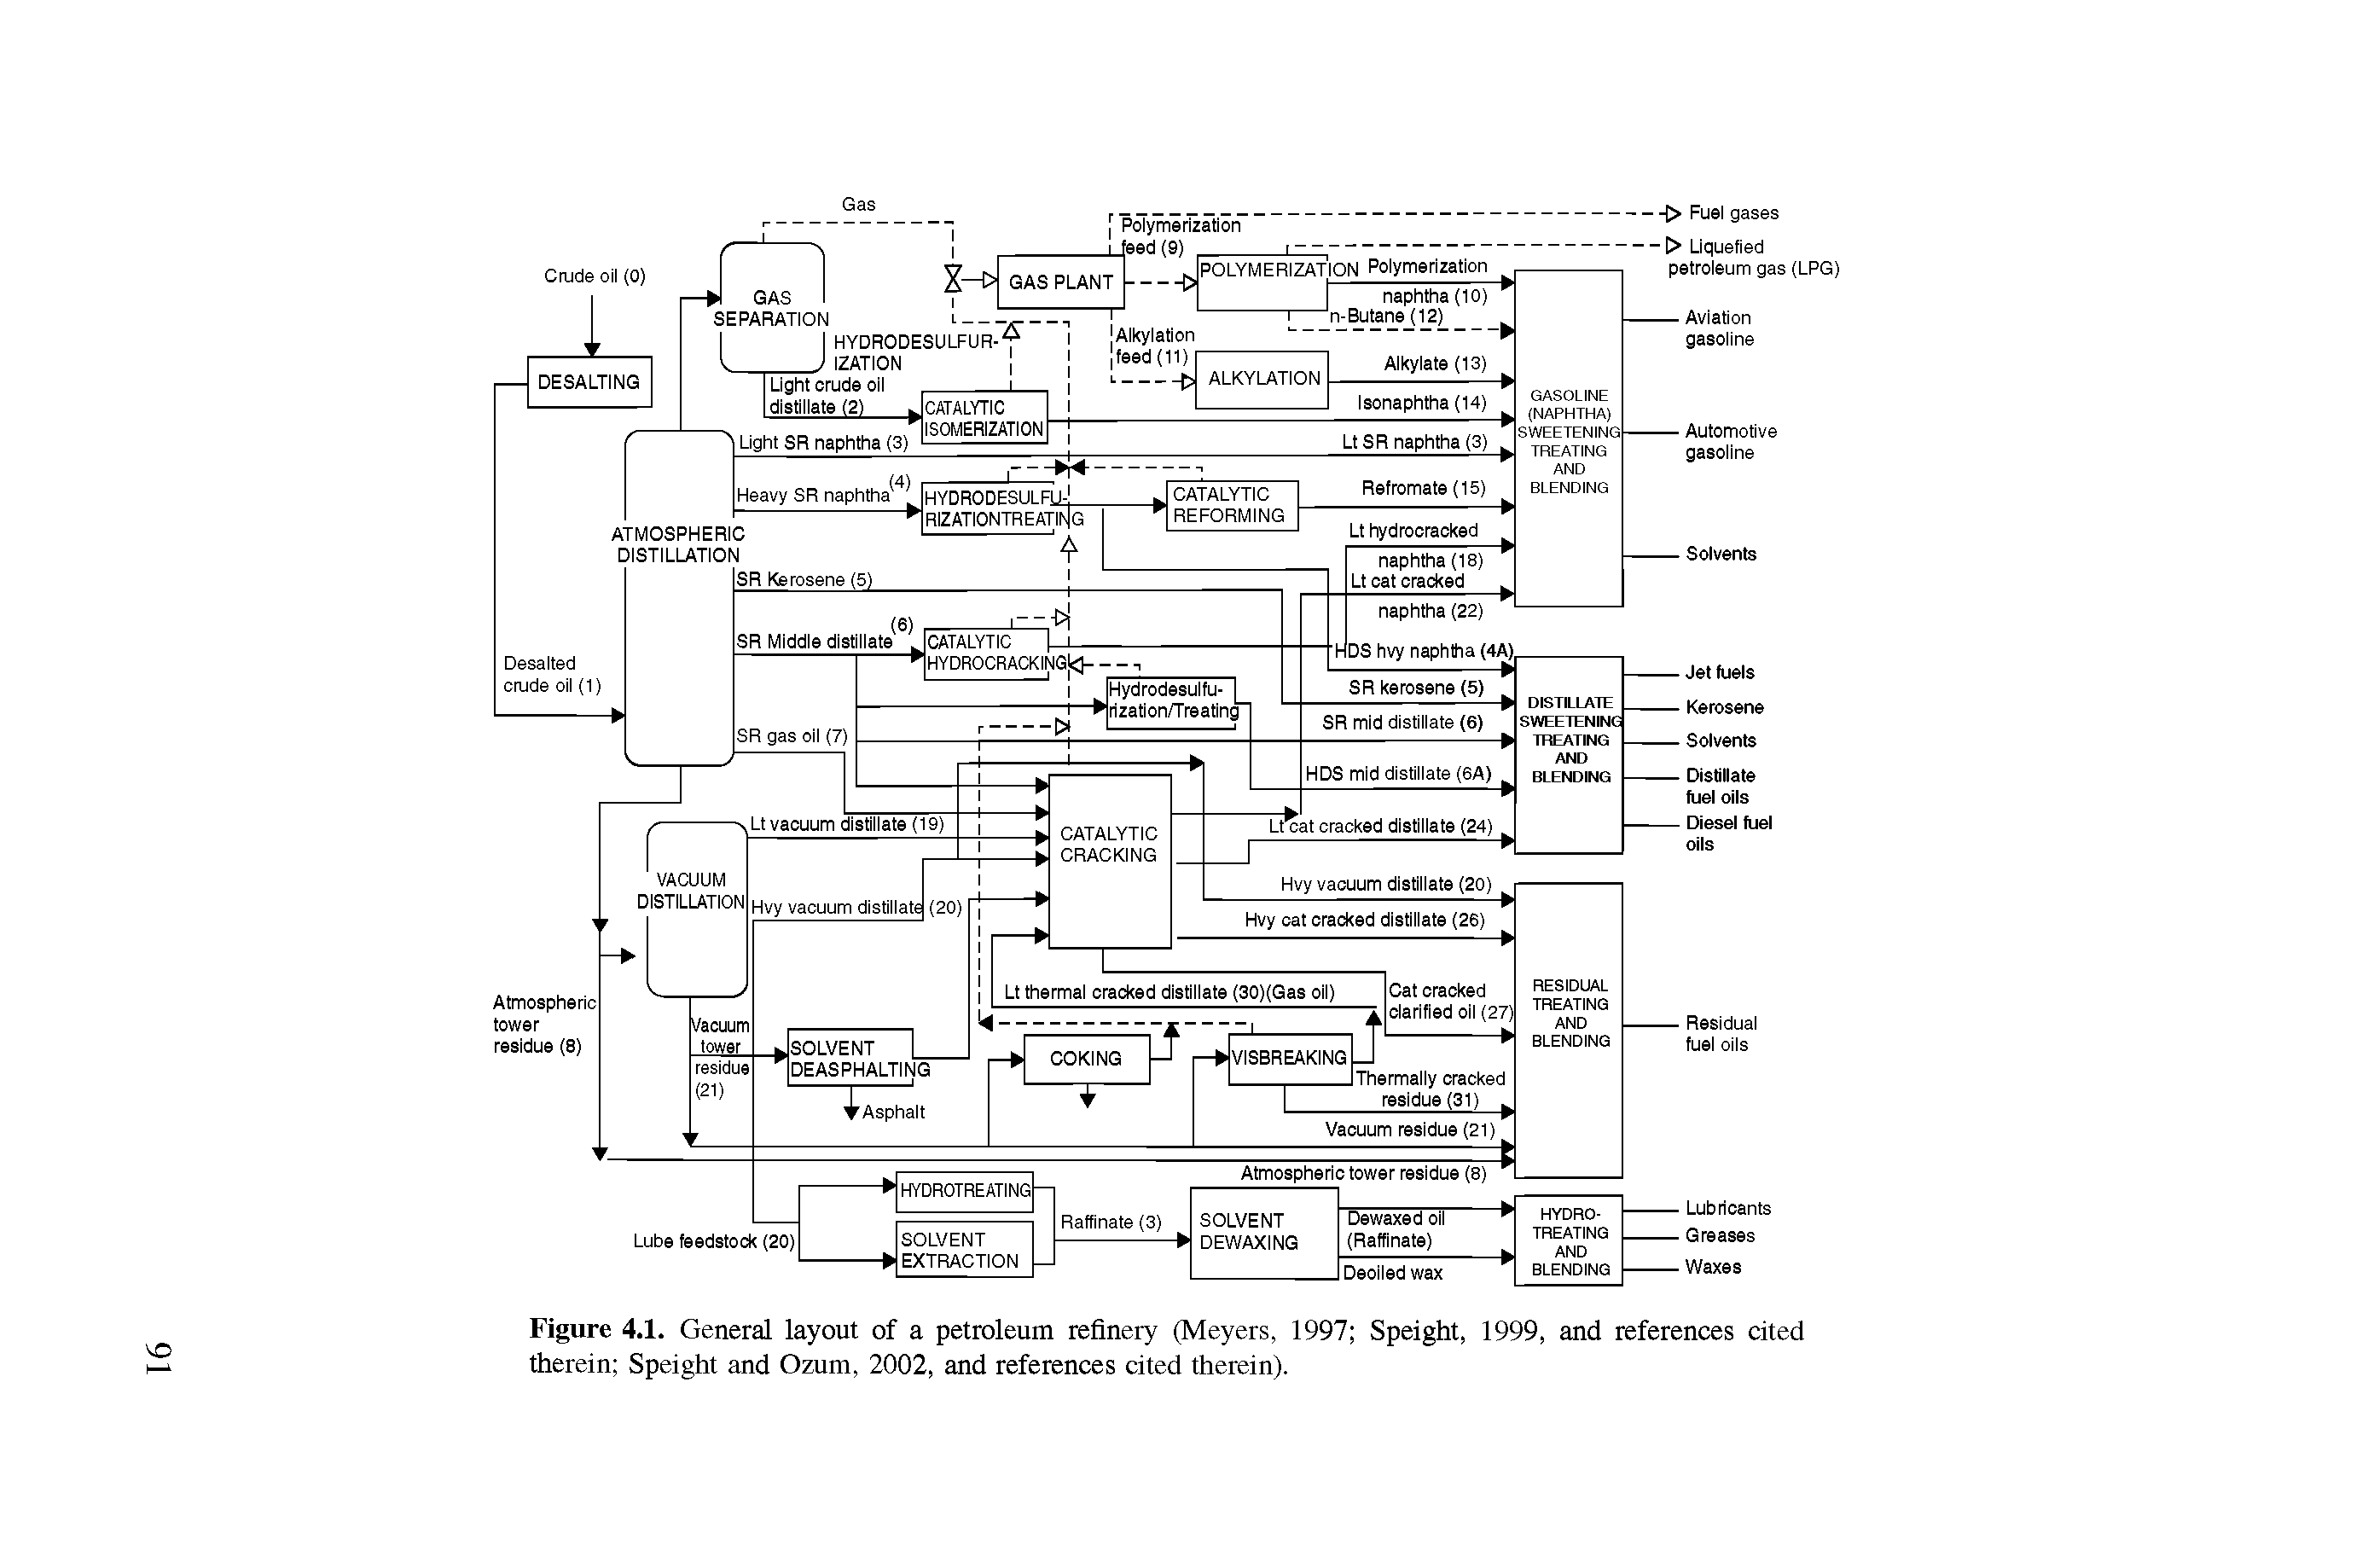 Figure 4.1. General layout of a petroleum refinery (Meyers, 1997 Speight, 1999, and references cited therein Speight and Ozum, 2002, and references cited therein).